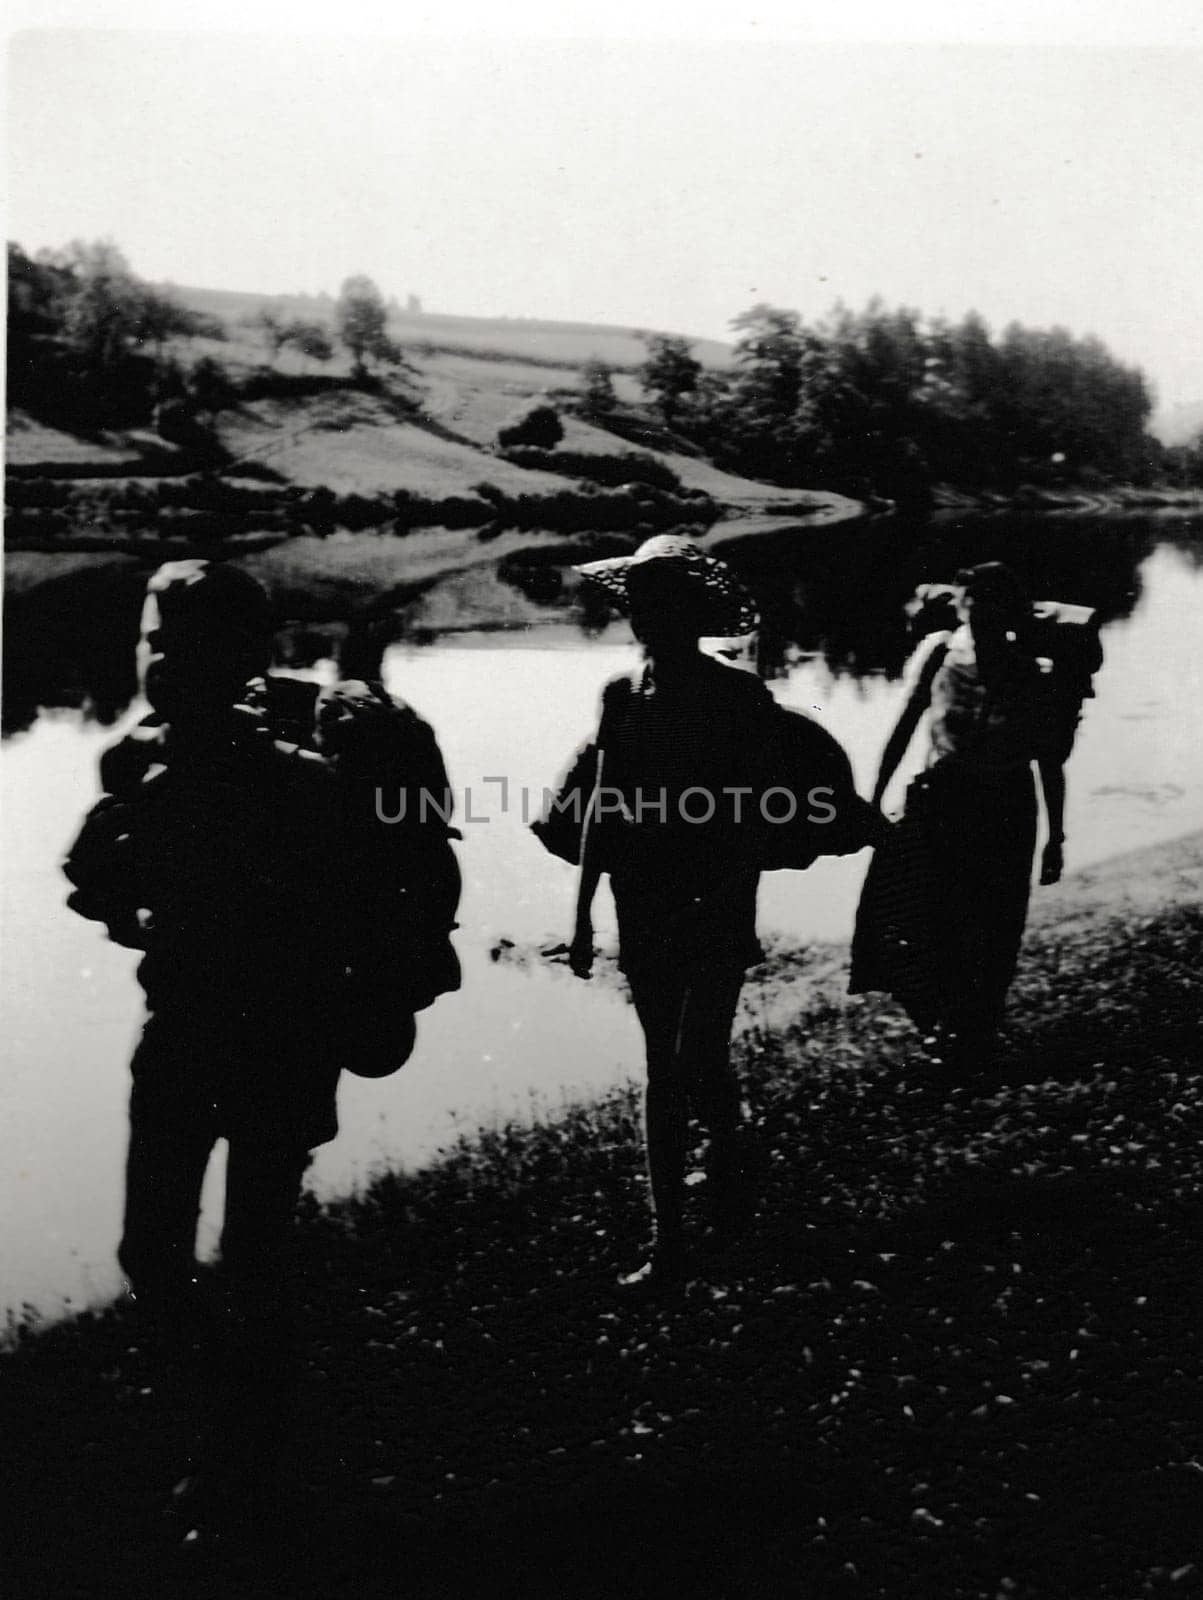 Retro photo shows tourists outside. Boys go alog the river bank. Vintage black and white photography. by roman_nerud